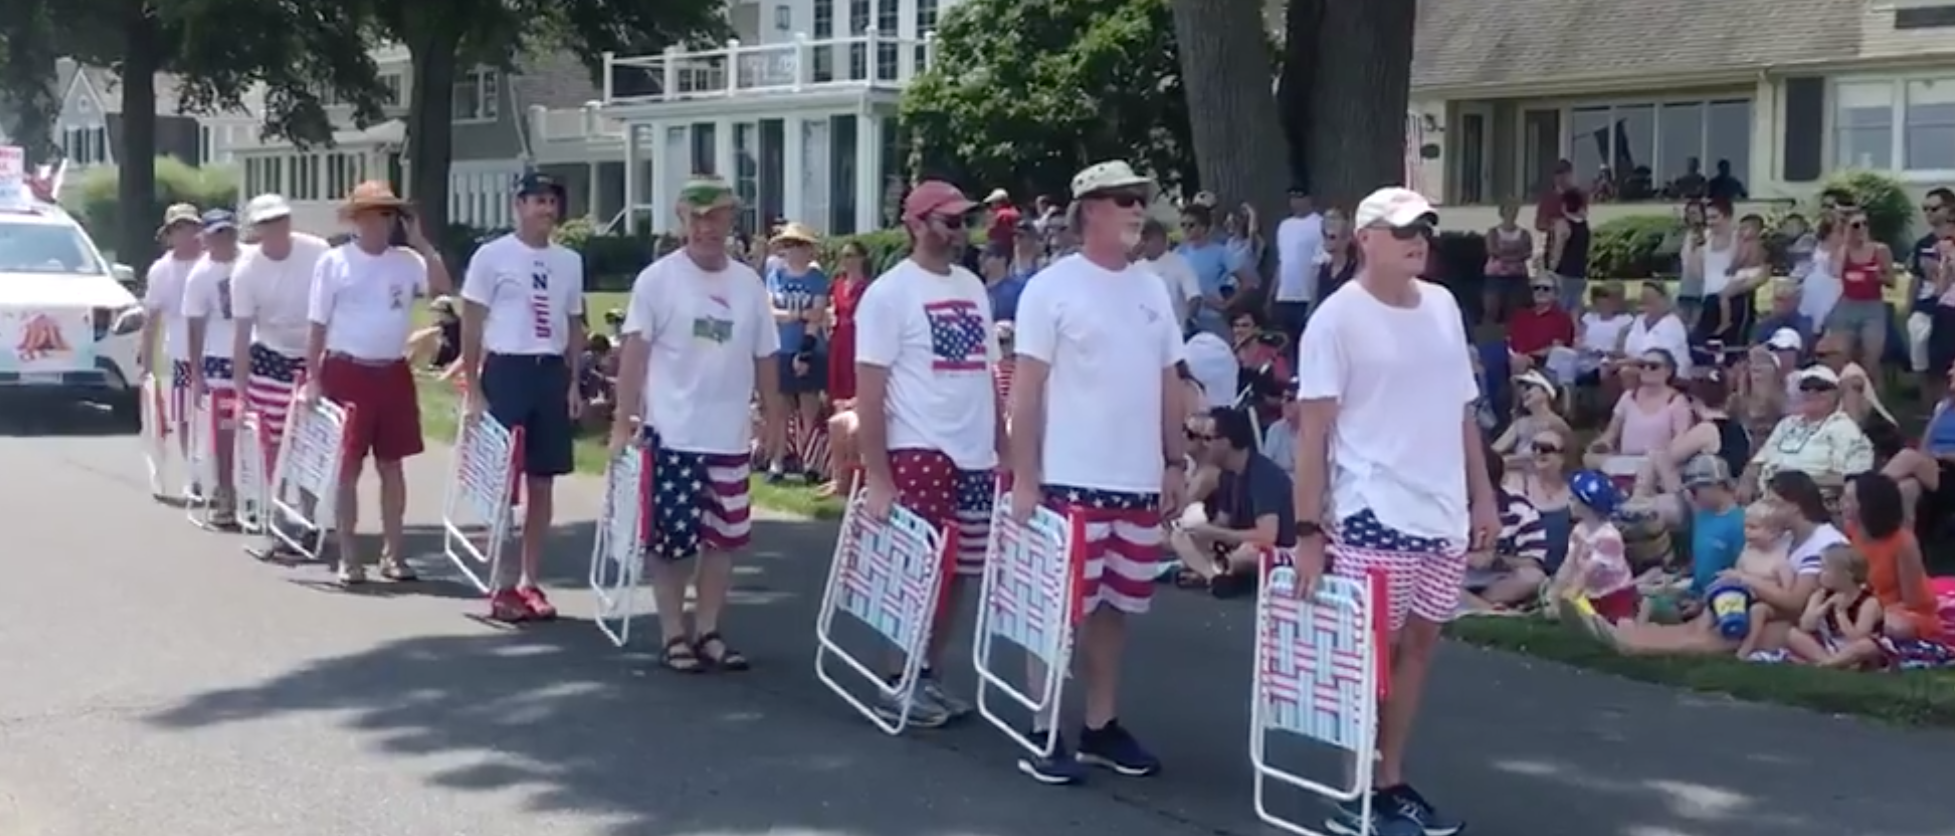 Lawn Chair Drill Team Rocks Annapolis Fourth of July Parade | The Daily